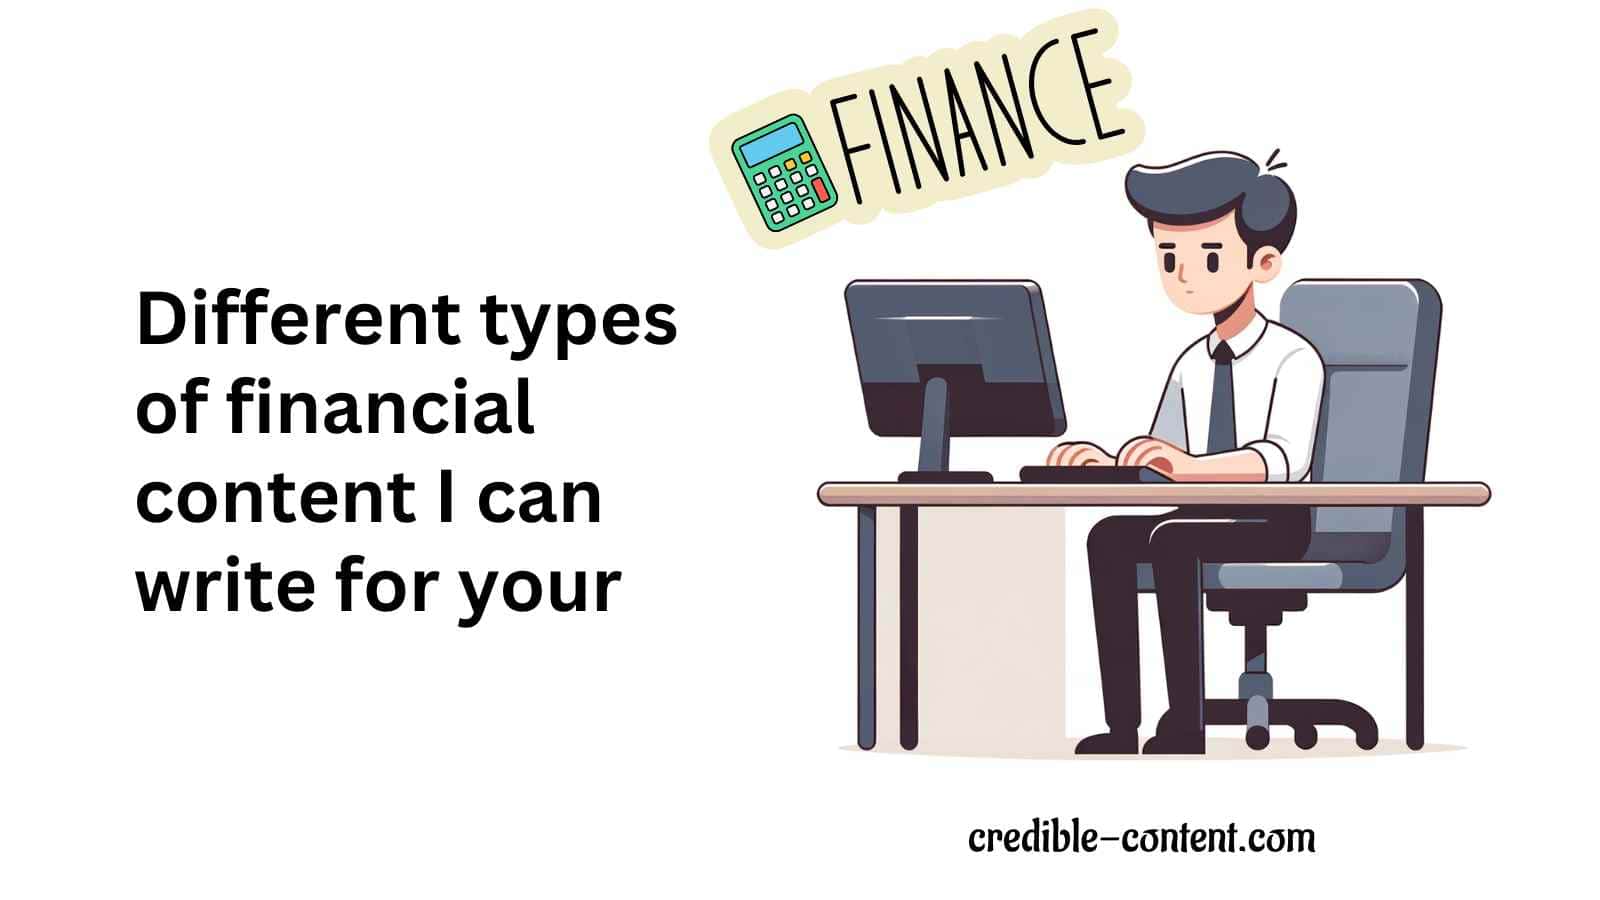 Different types of financial content I can write for your